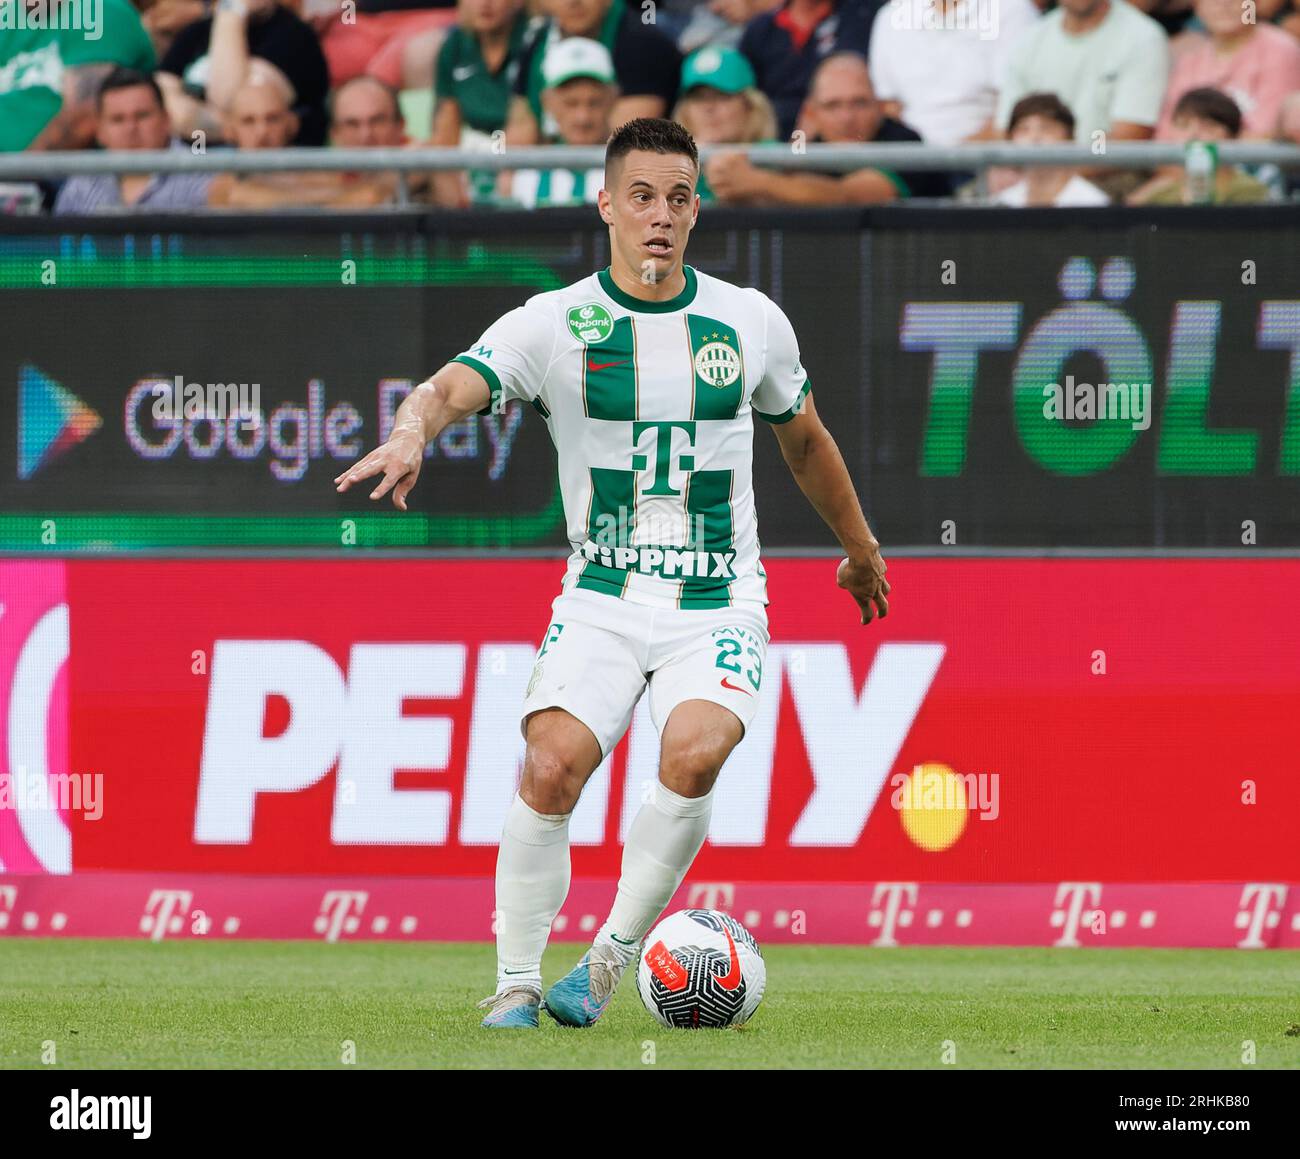 Endre Botka of Ferencvarosi TC controls the ball during the UEFA News  Photo - Getty Images